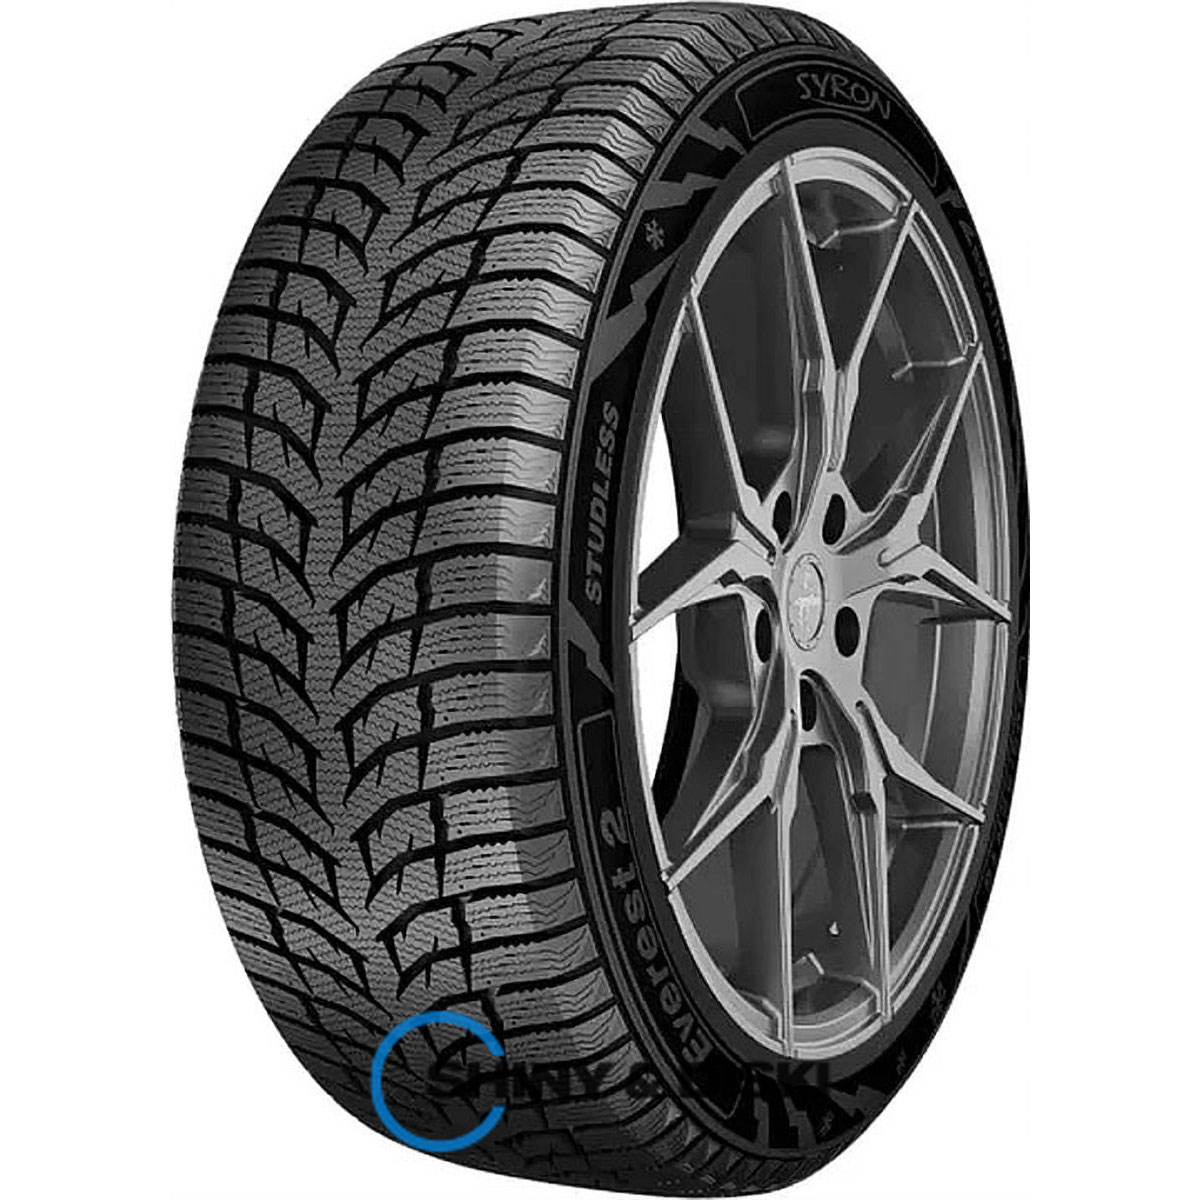 syron everest 2 185/60 r15 84t